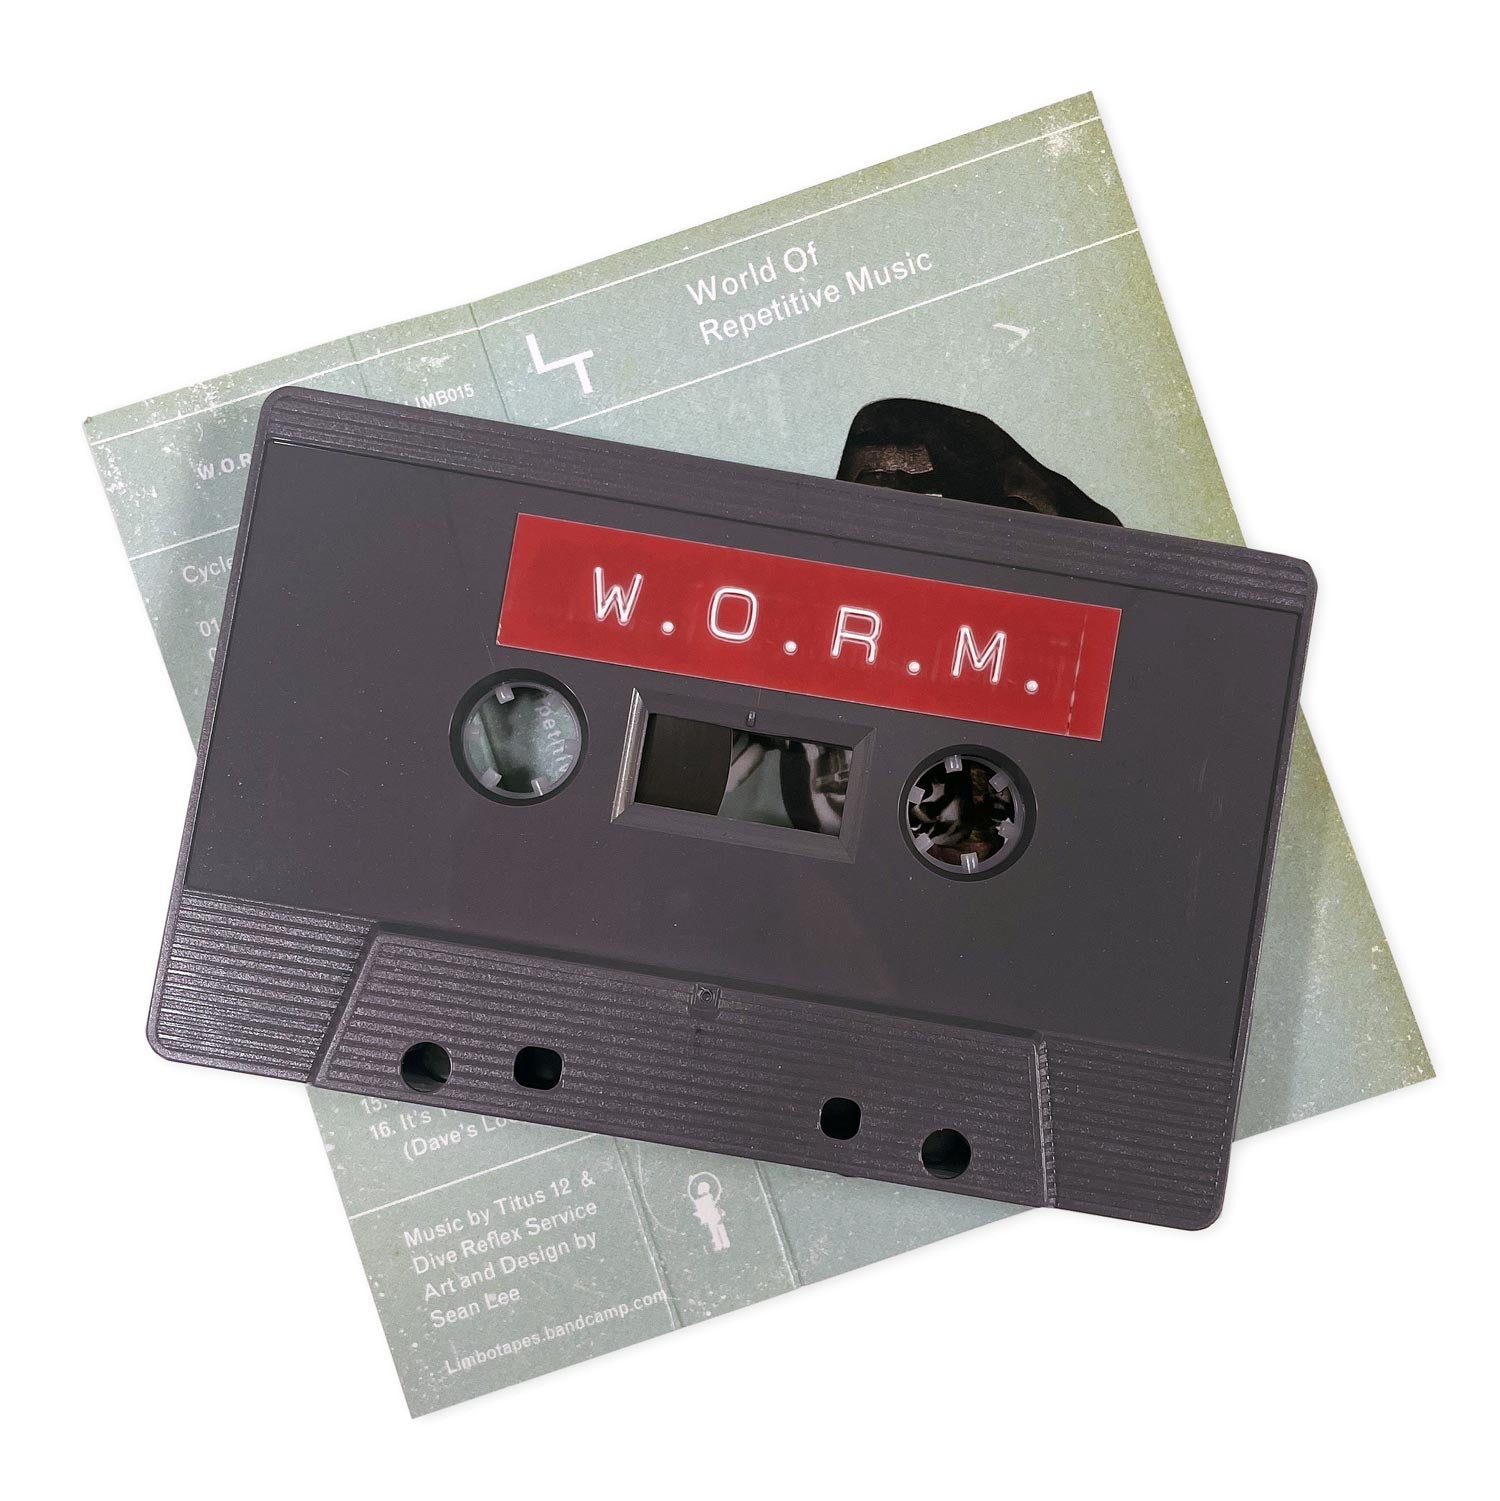 W.O.R.M. -  World Of Repetitive Music